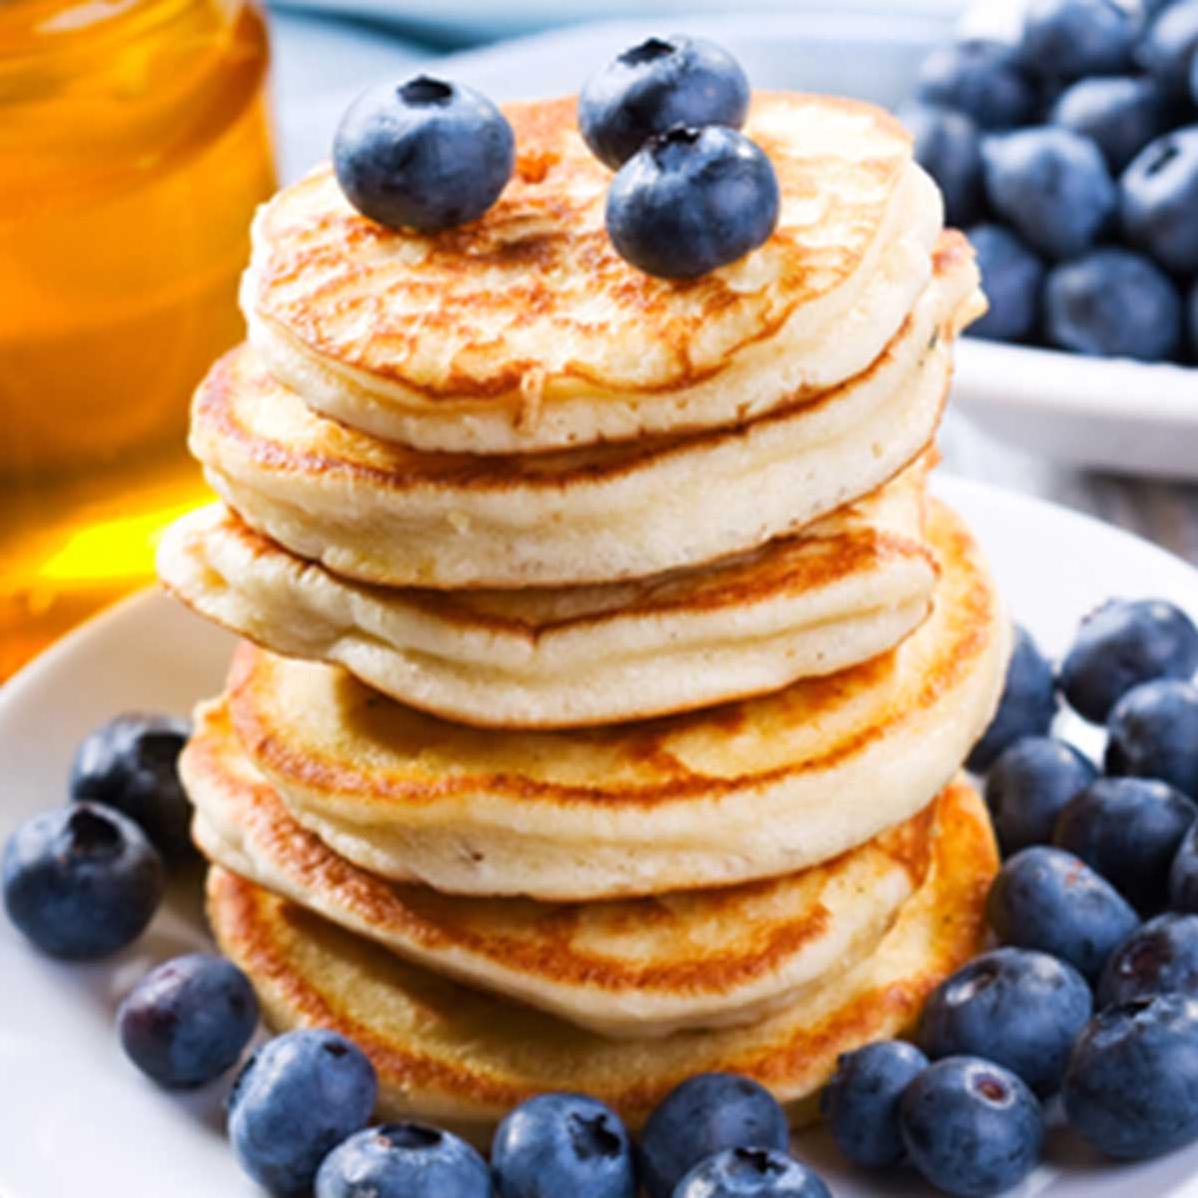  Wake up to a stack of golden, fluffy dairy-free pancakes.